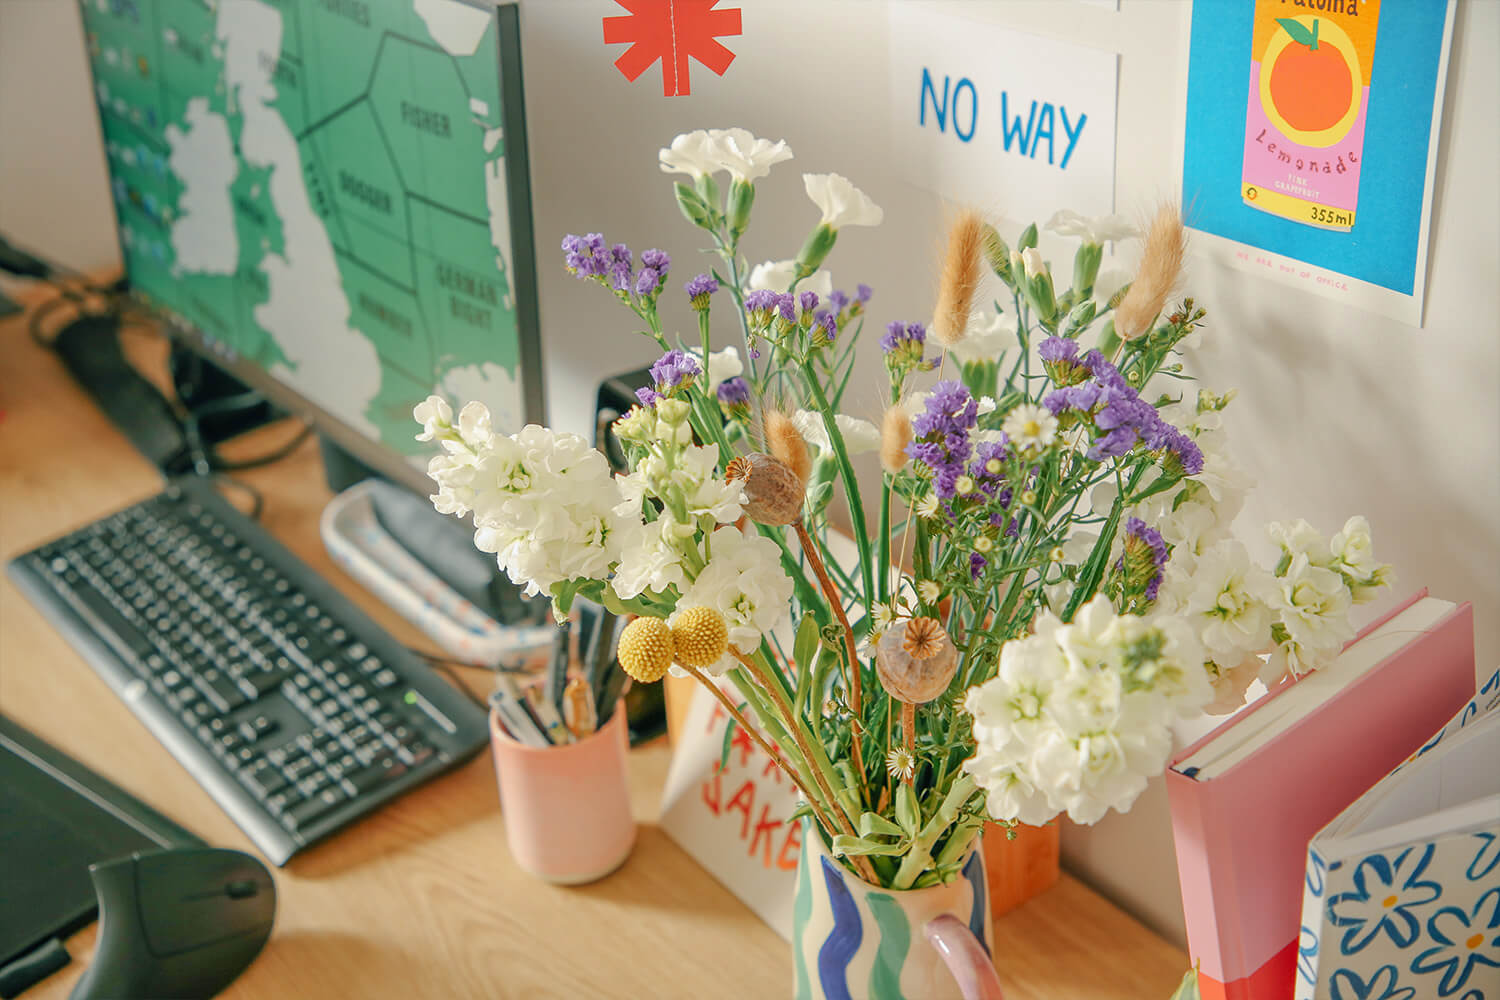 Wildflowers on the desk of illustrator and maker Taaryn Brench's colourful studio